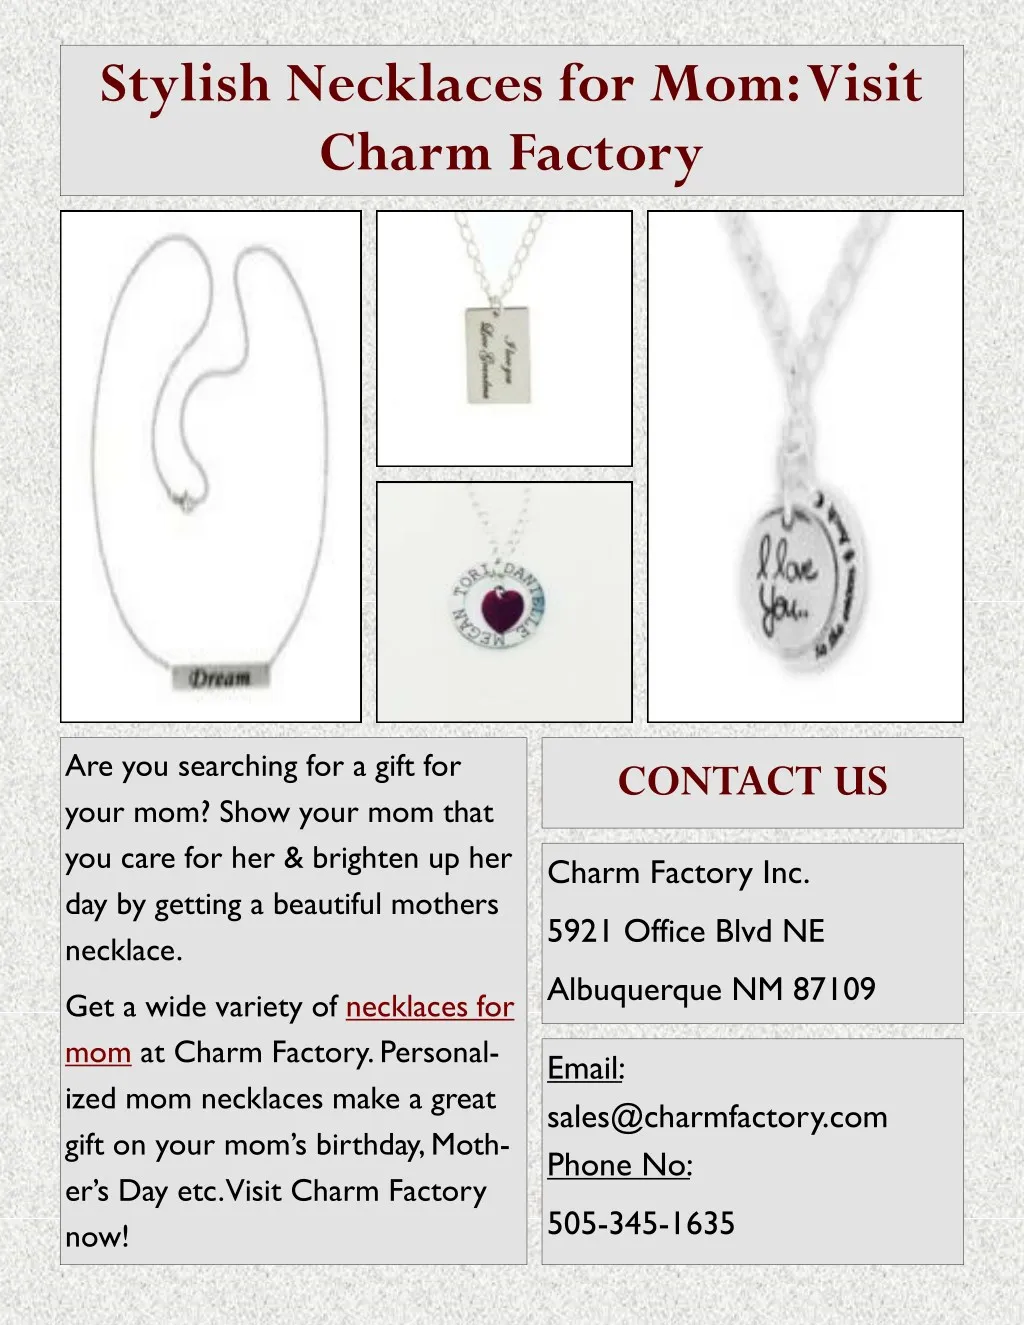 stylish necklaces for mom visit charm factory